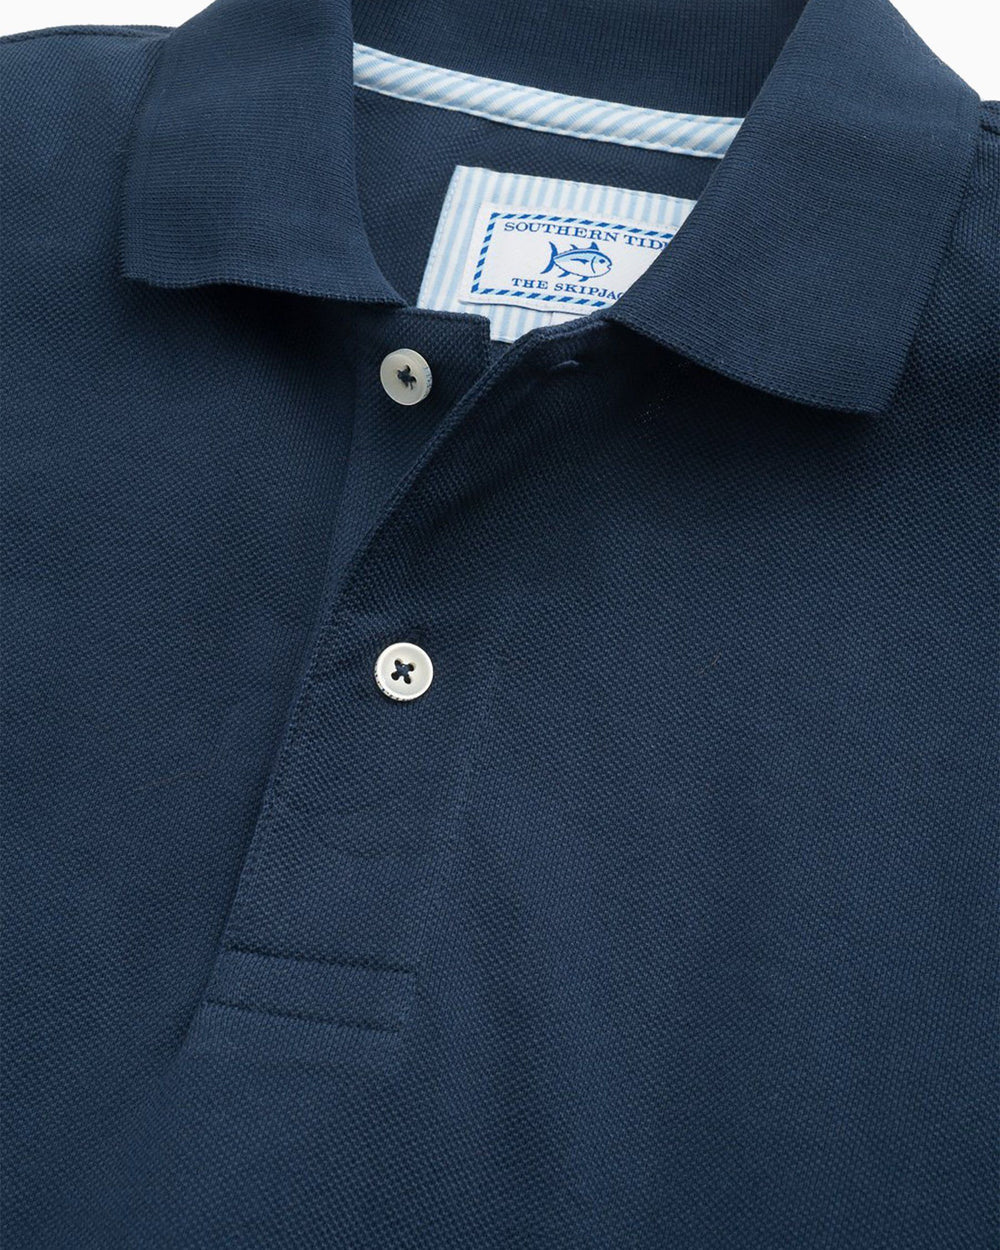 The detail of the Men's Navy Georgia Southern Pique Polo Shirt by Southern Tide - Navy